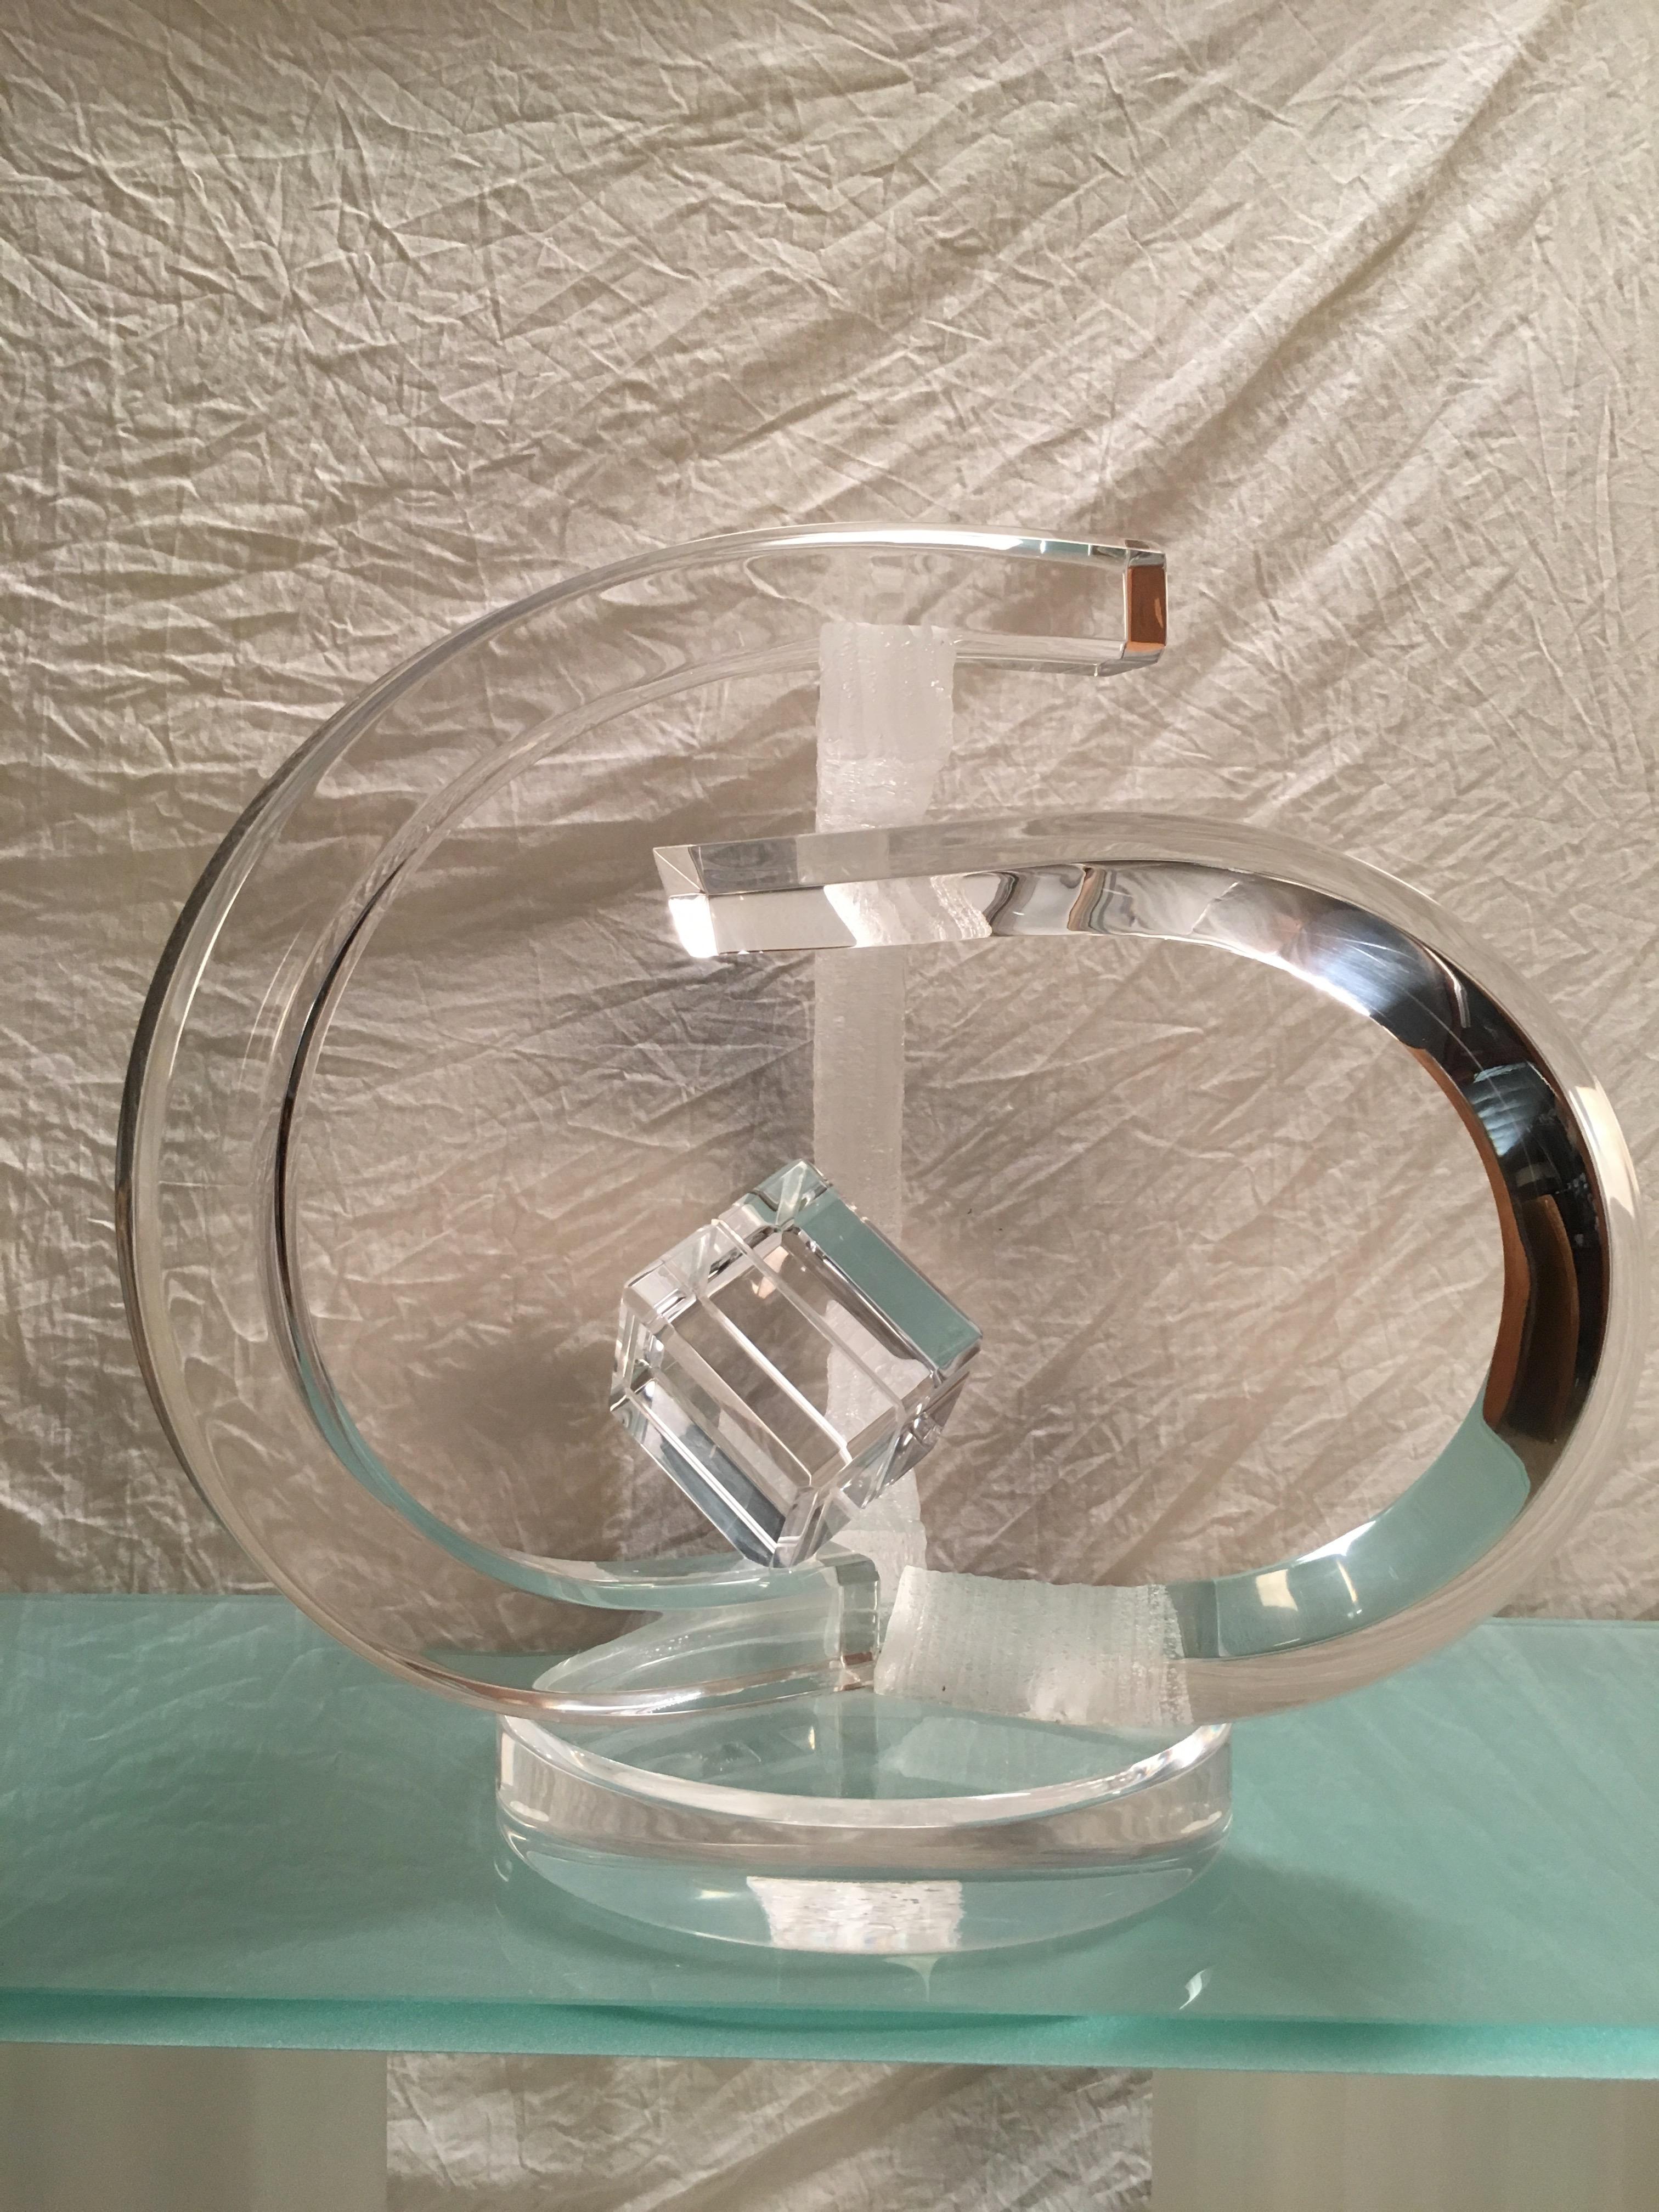 Large freeform design with a combination of chiseled Lucite and polished with a cube in the center.